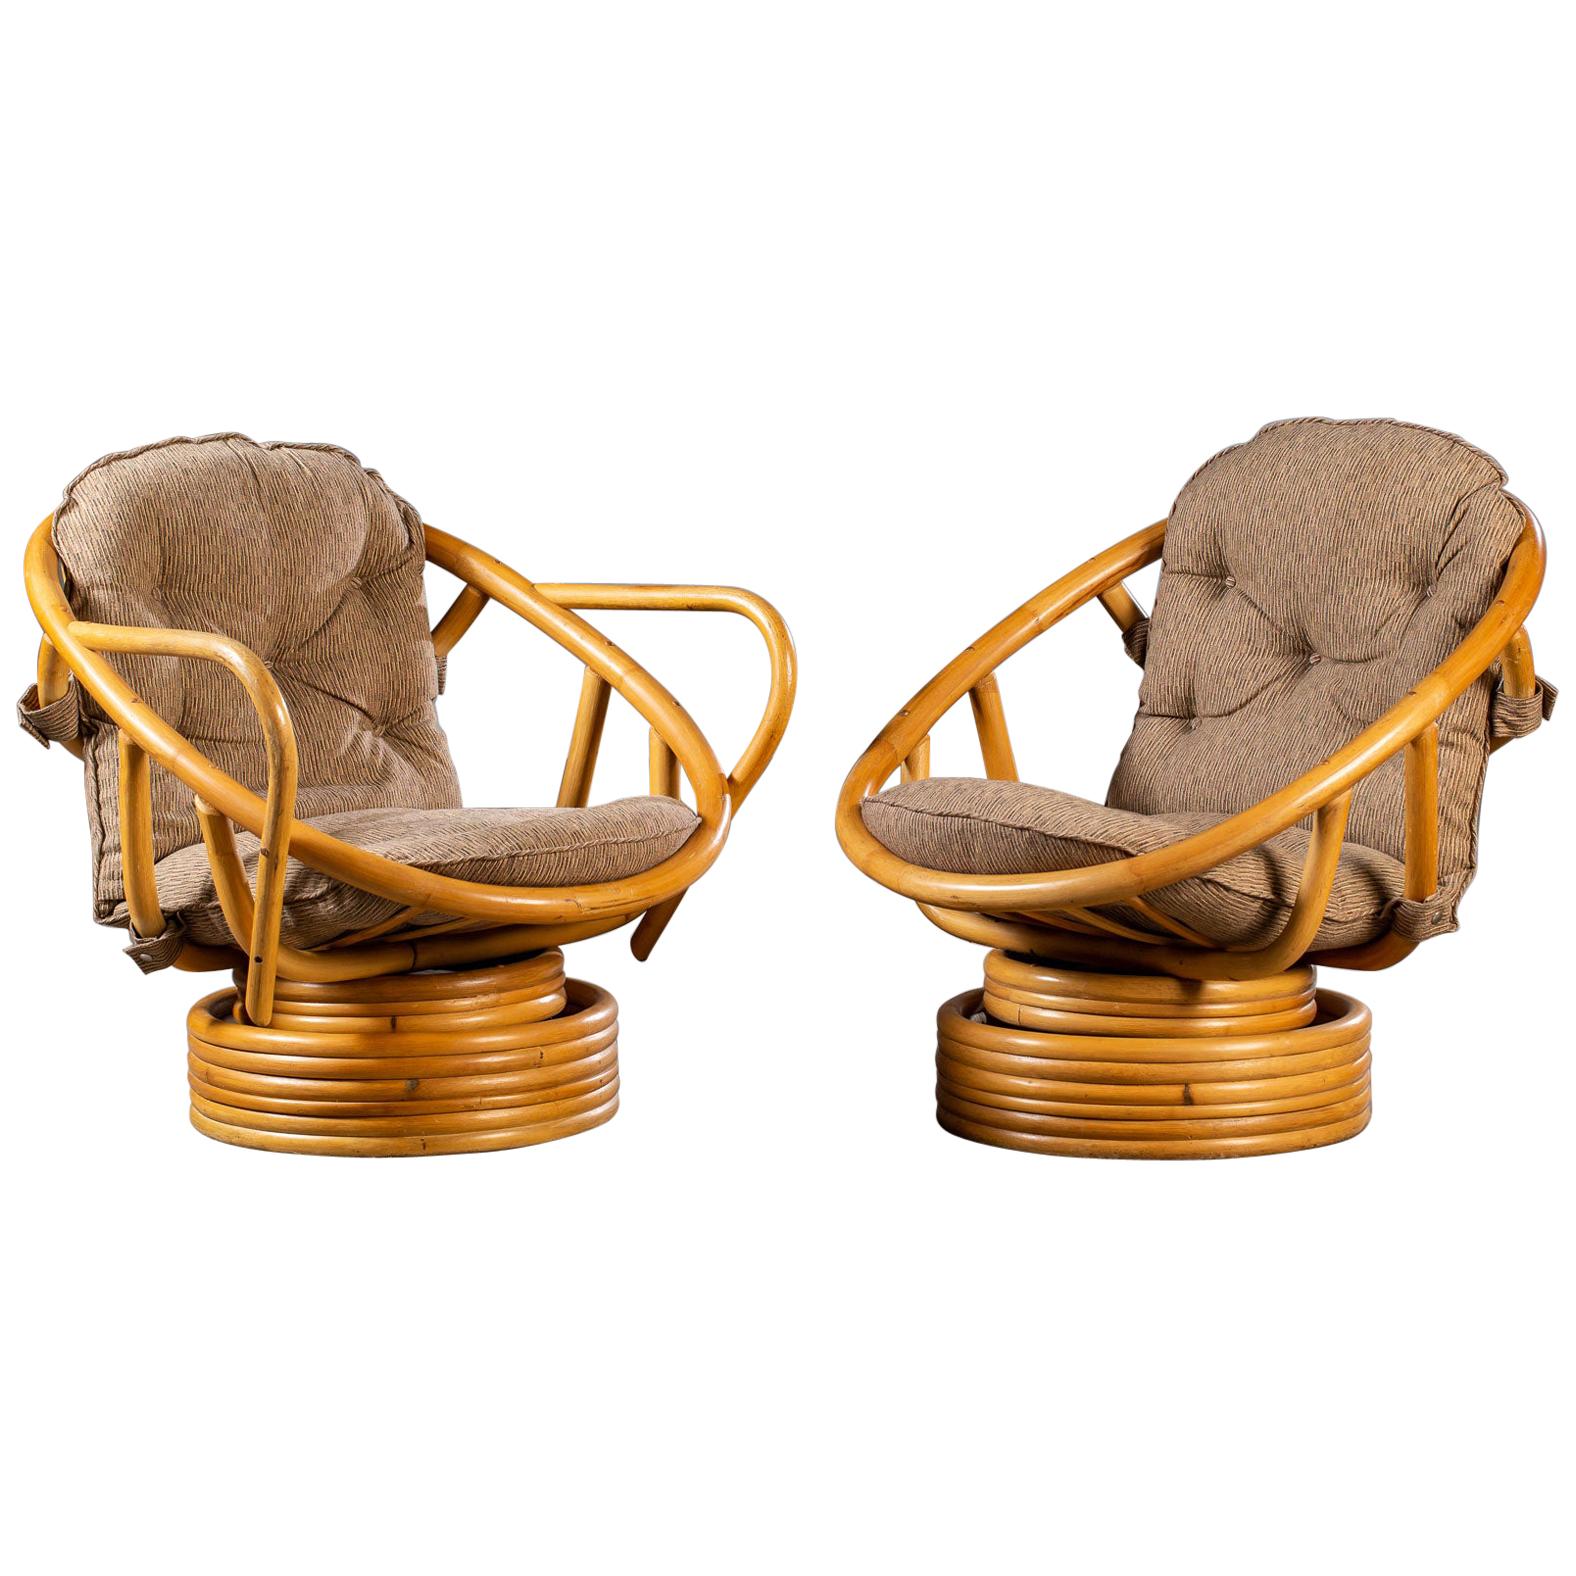 Two Vintage American Bamboo Swivel Rocking Egg Chairs, circa 1970